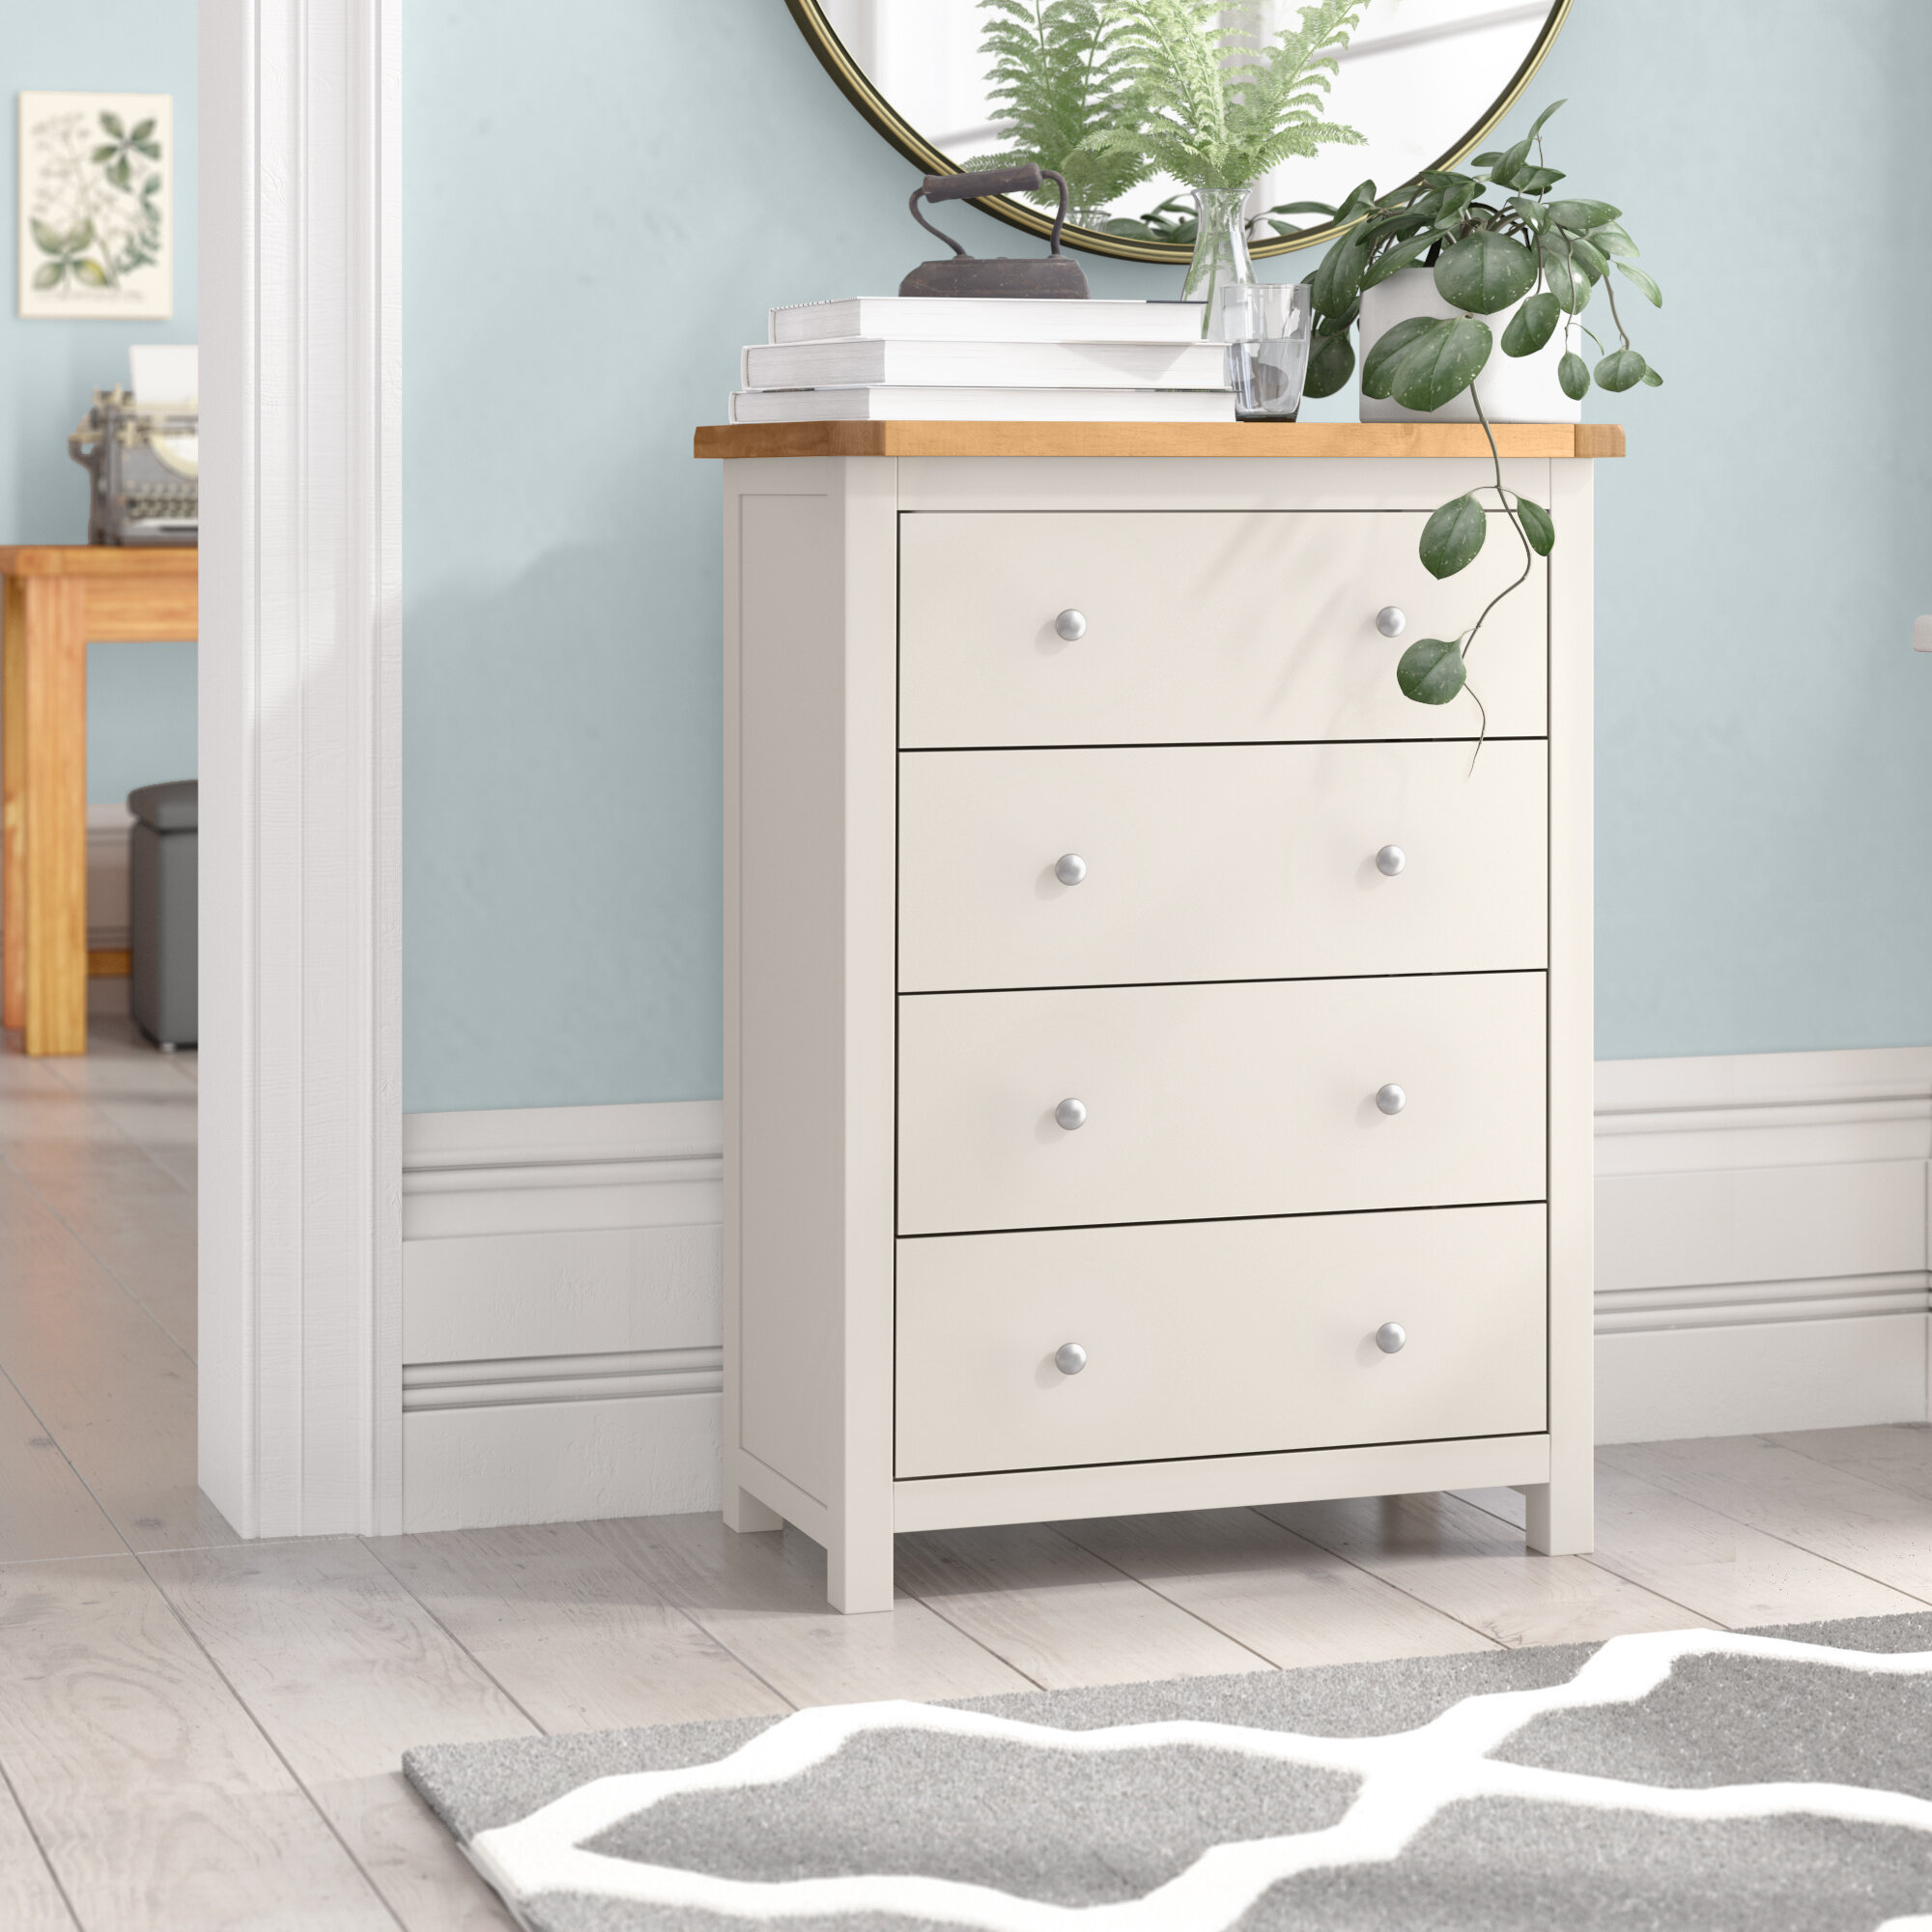 Living Room or Hallway Roseland Furniture Painted Solid Wooden Cupboard for Dining Room Cheltenham Blue Small Sideboard Storage Cabinet with 2 Drawers Fully Assembled